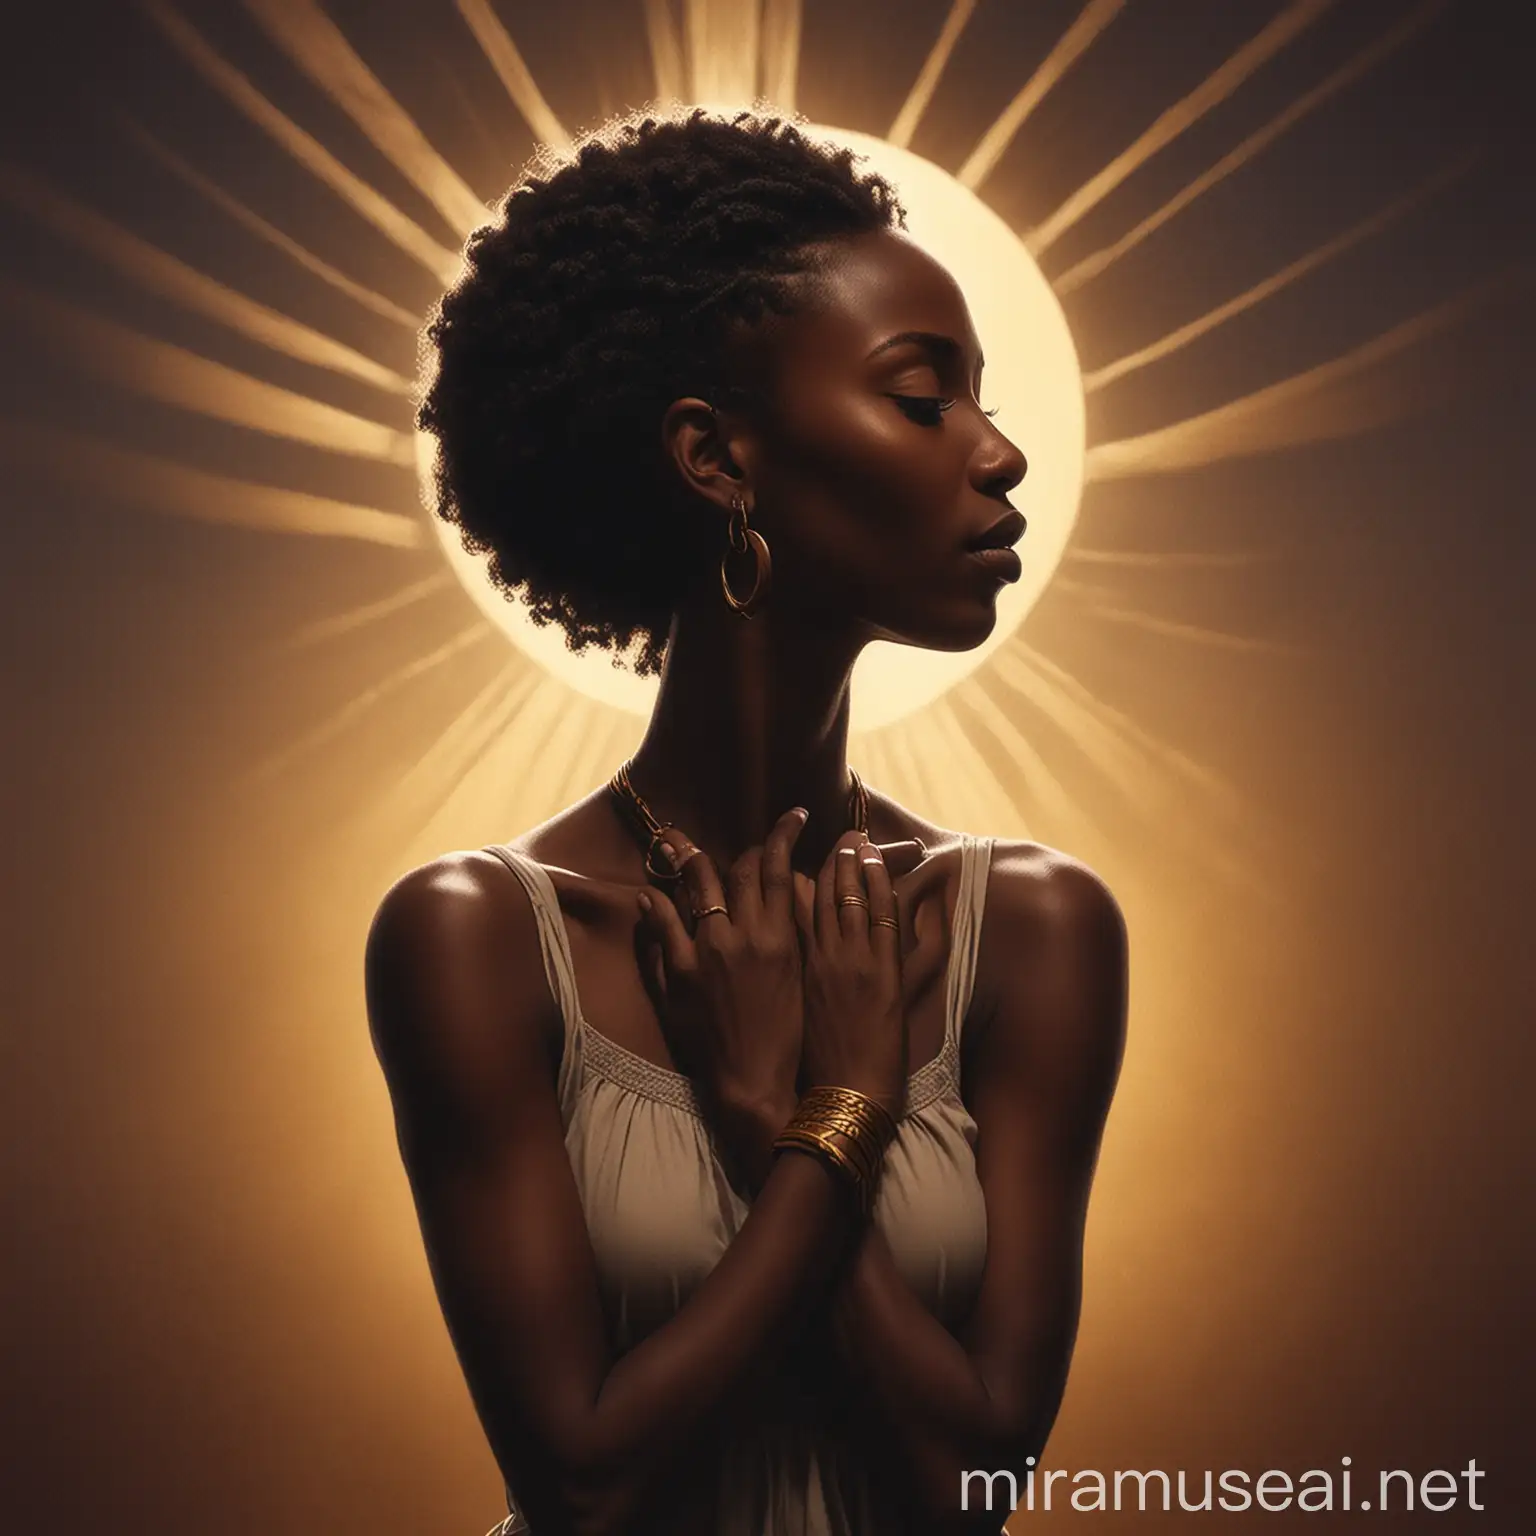 embracing, shadow work, within shadows, spiritual journey, self-awareness, African, ascension